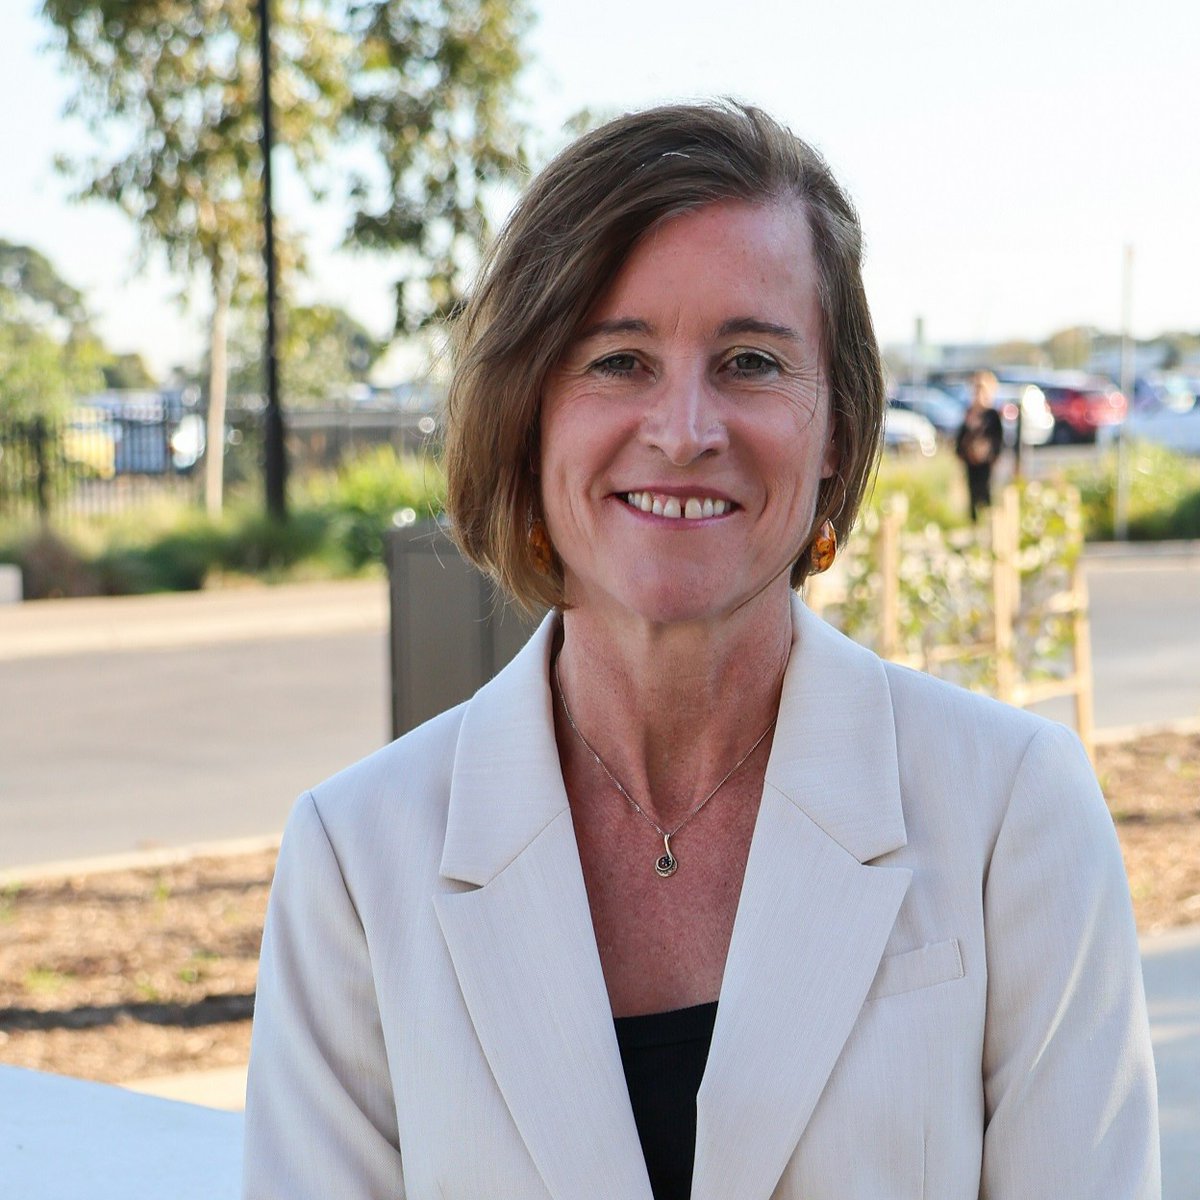 Building on her nationally recognised work for improving aged care, @FlindersCFI's Prof @JulieRatcliff19 will now turn her attention to the voices of older people in our healthcare system, after being awarded almost $3m from the @nhmrc. Read more 👉 bit.ly/3wyTMQU